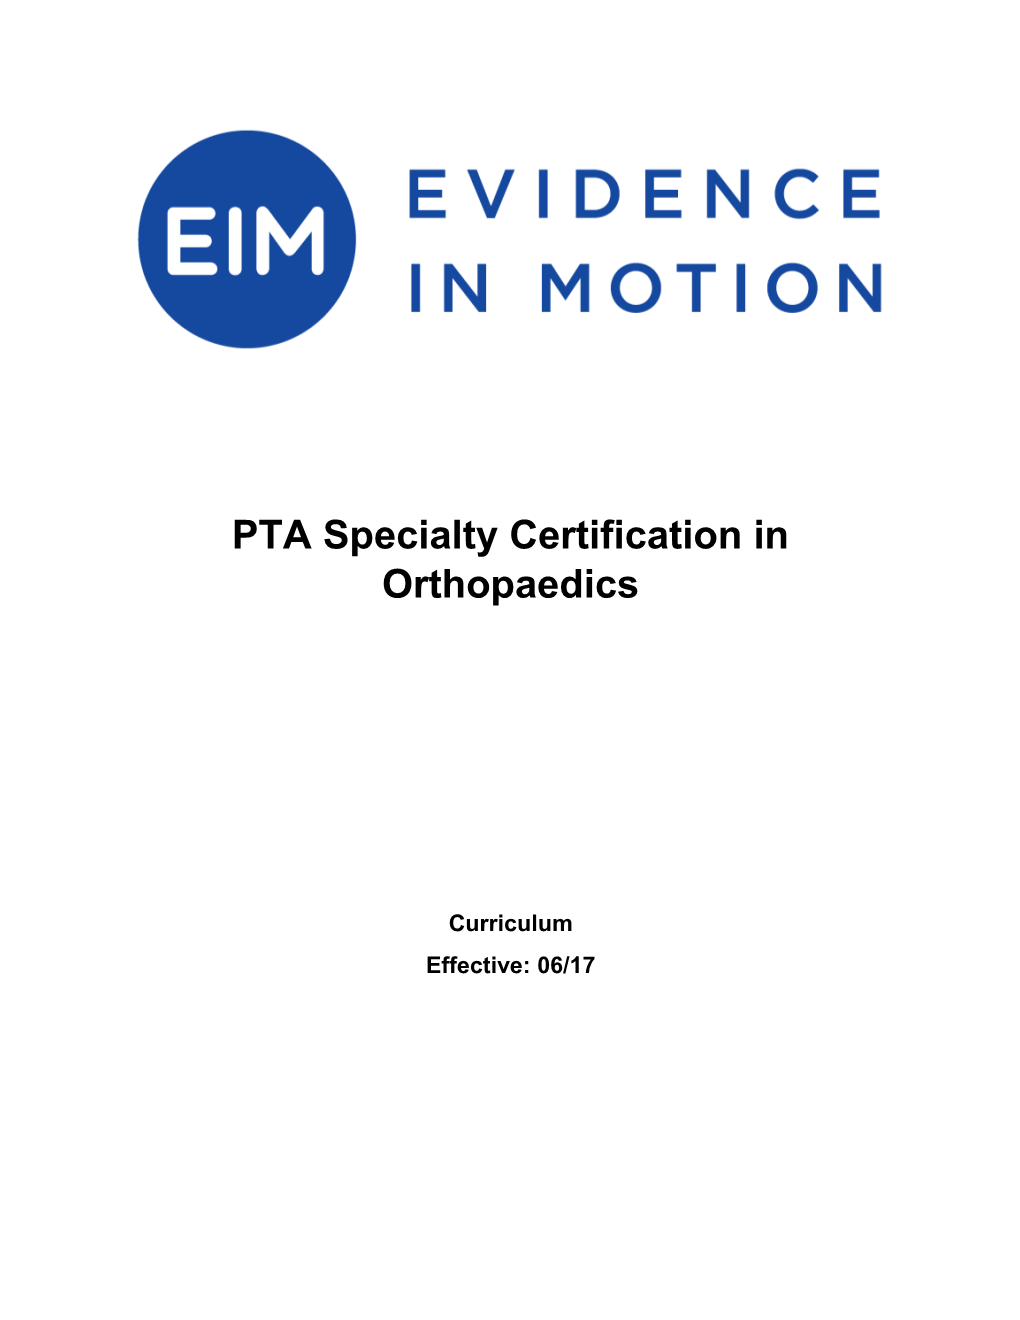 PTA Specialty Certification in Orthopaedics